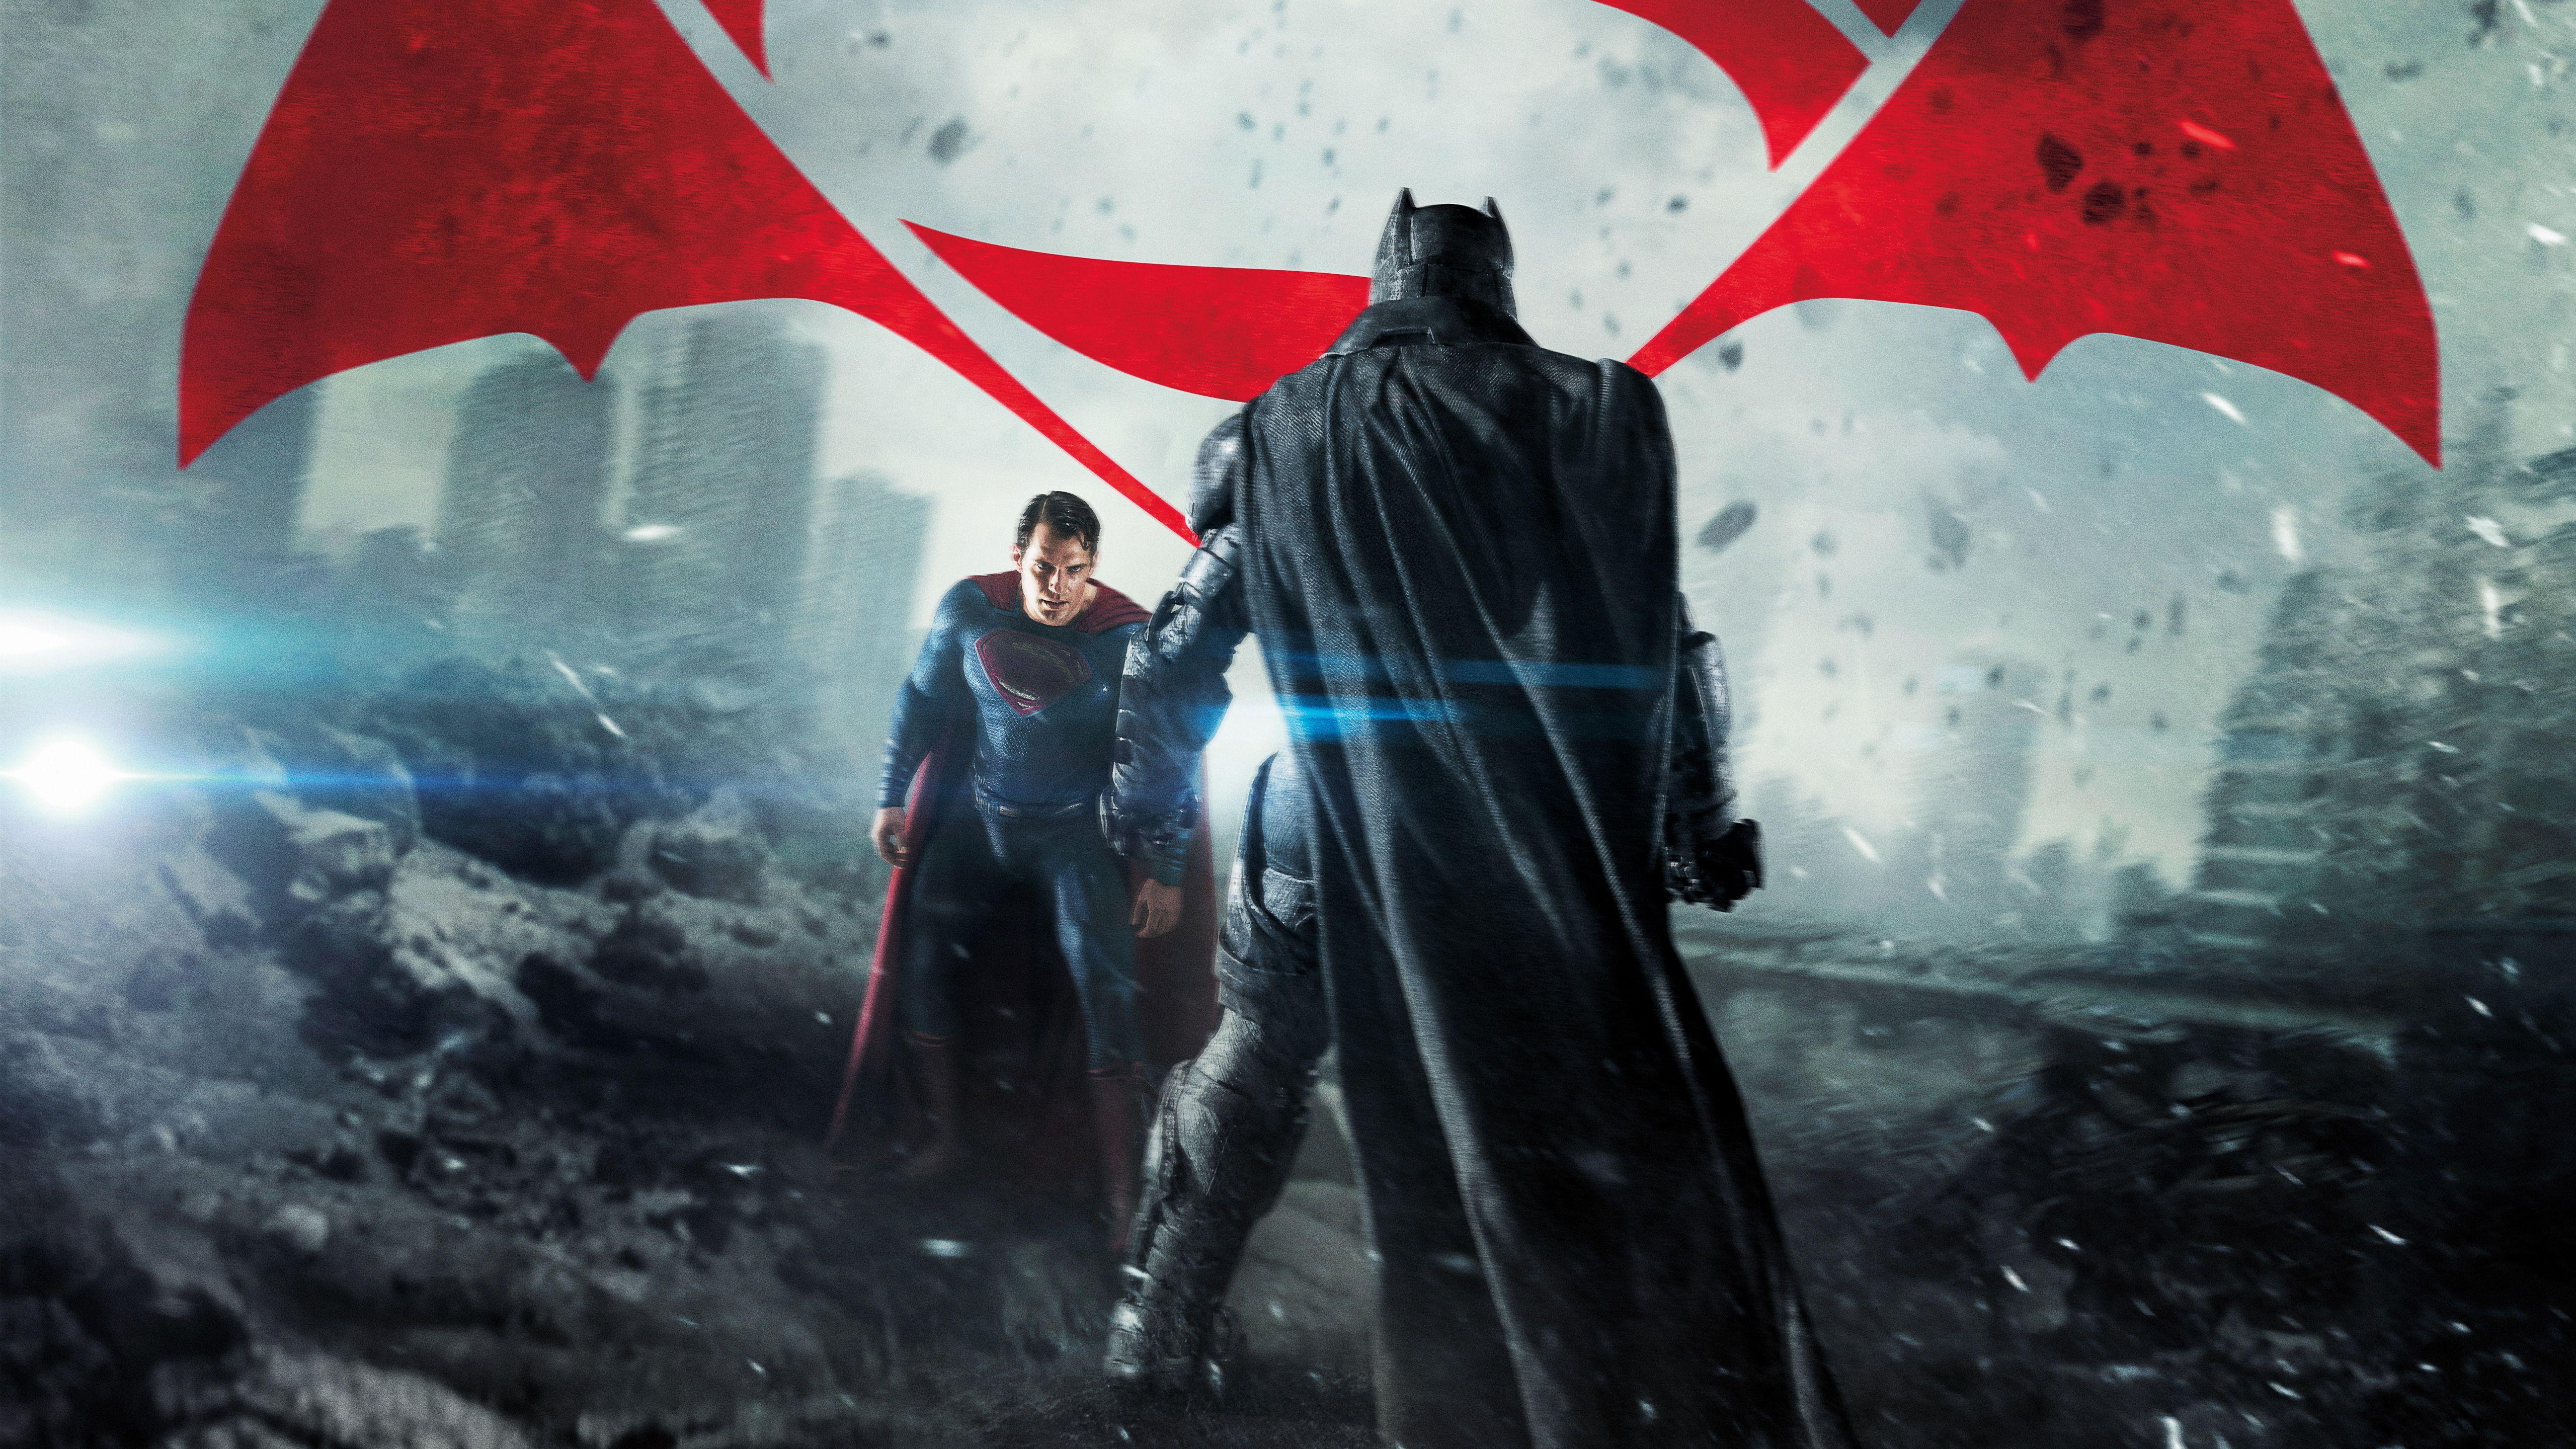 Wallpaper Batman v Superman, Dawn of Justice, 5K, Movies,. Wallpaper for iPhone, Android, Mobile and Desktop